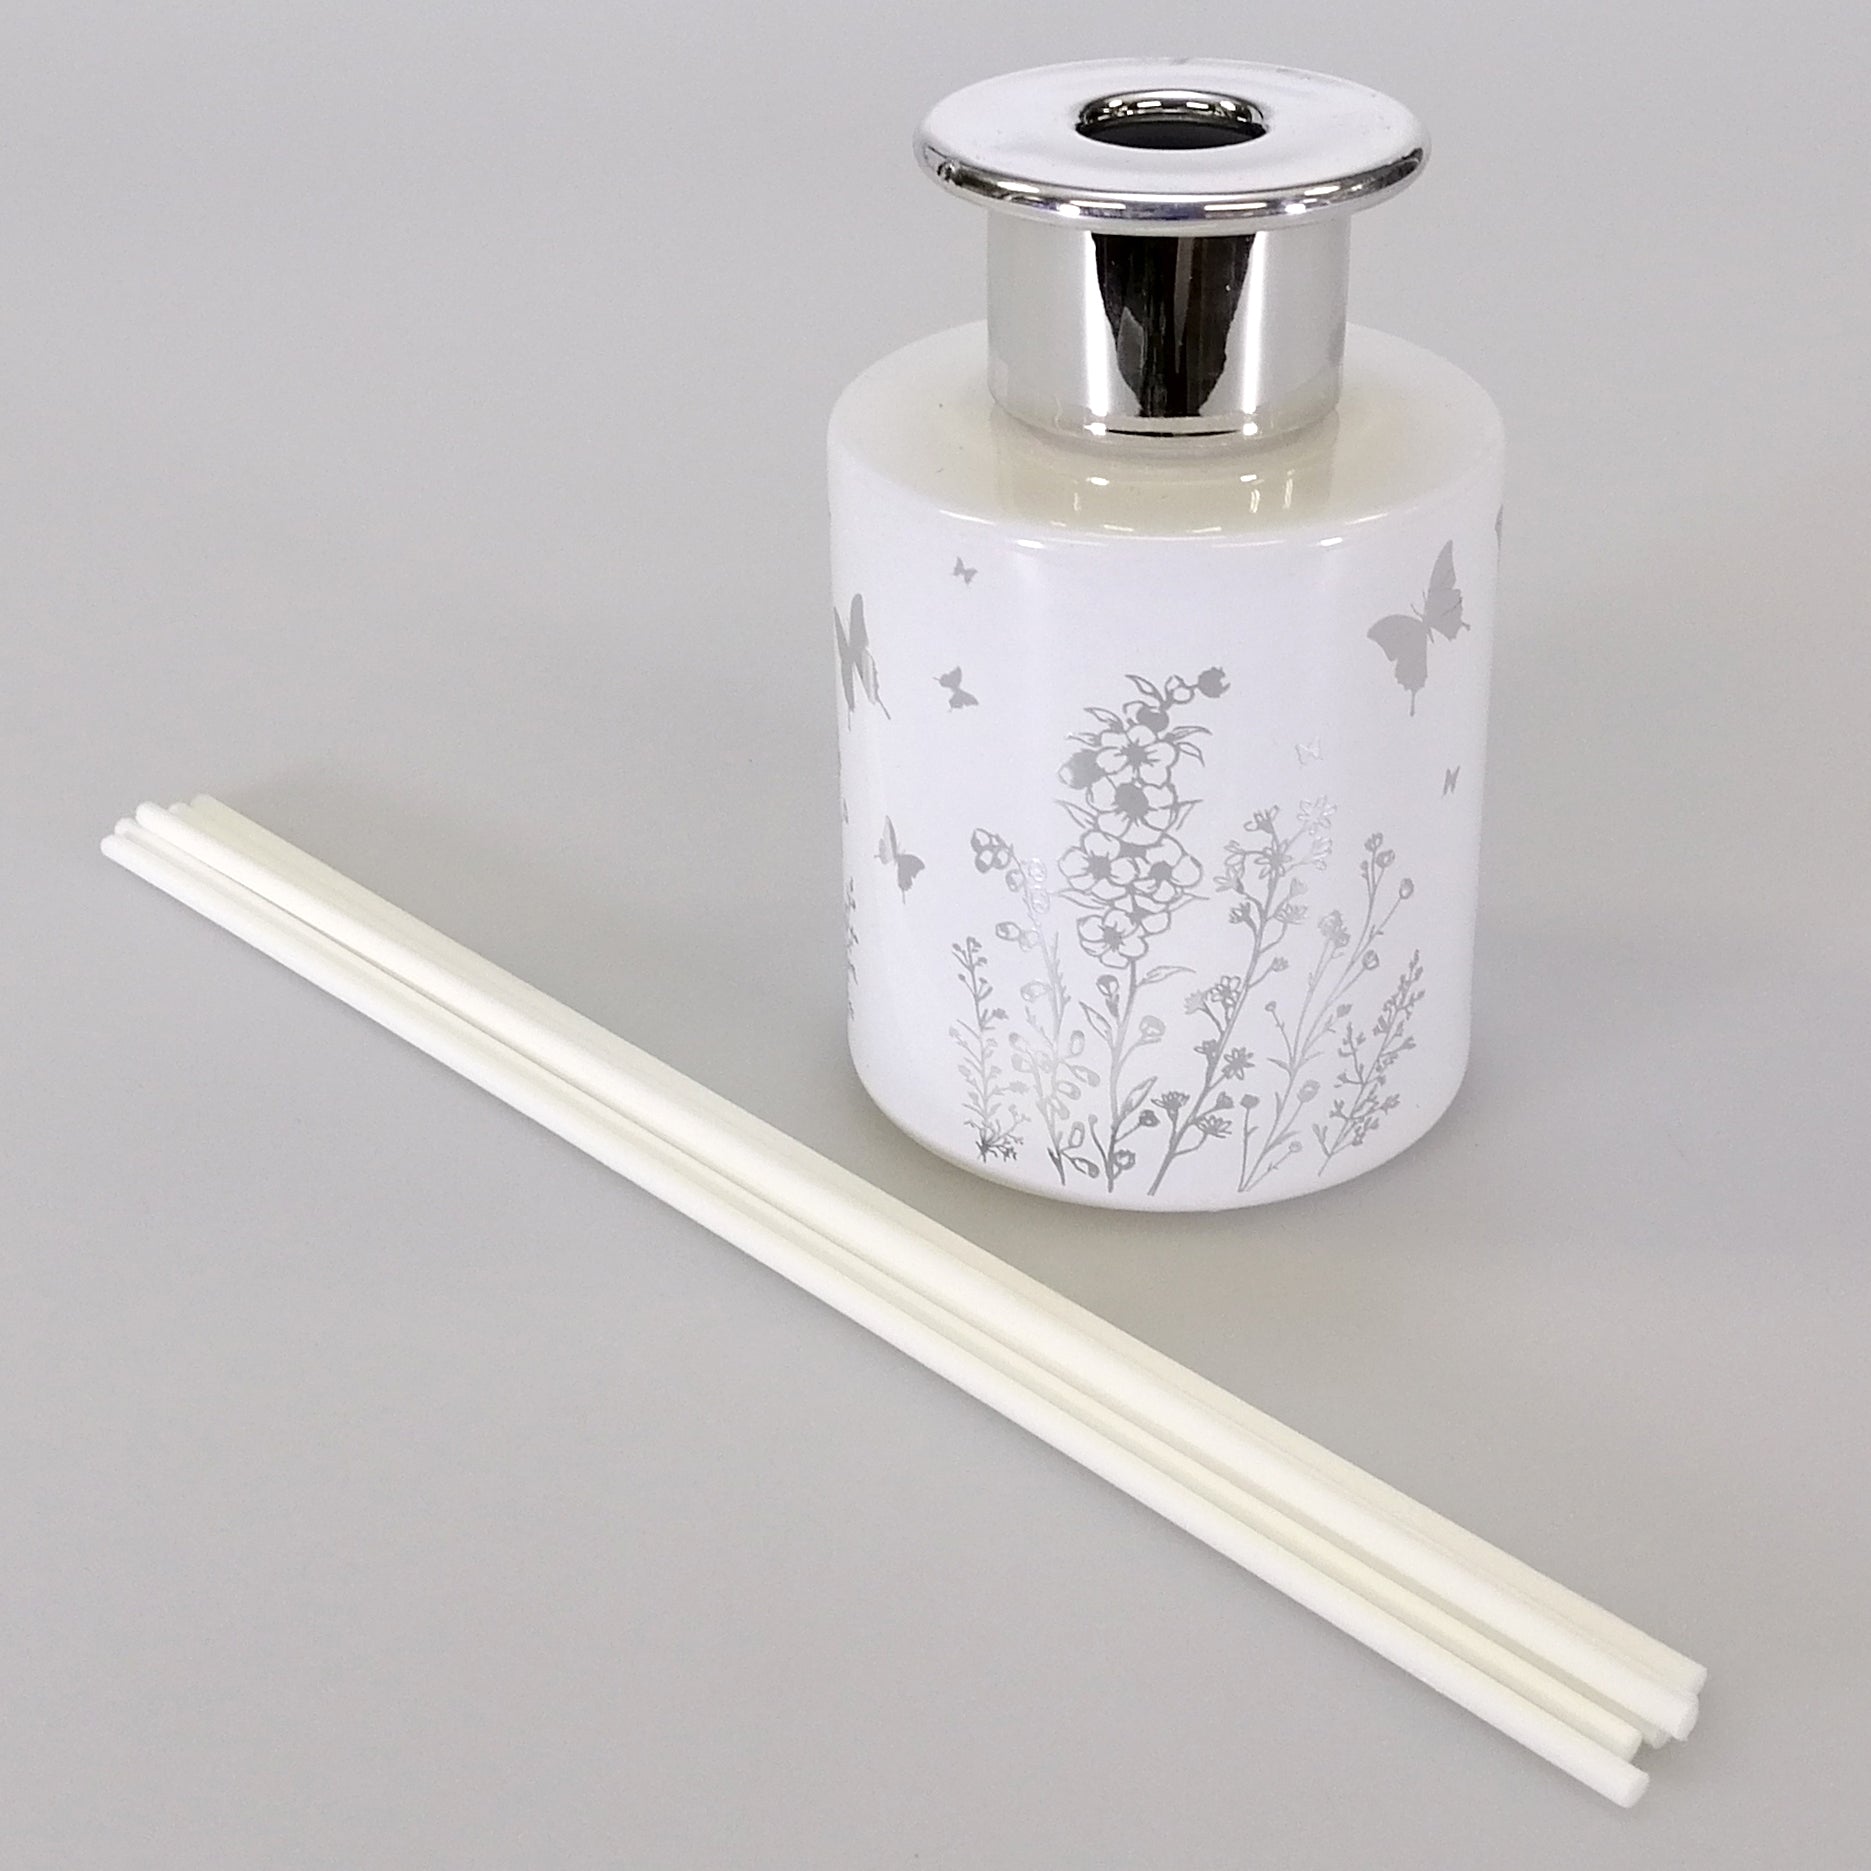 Desire - Hand Poured Diffuser - Butterfly Sparkle - Peony & Blush